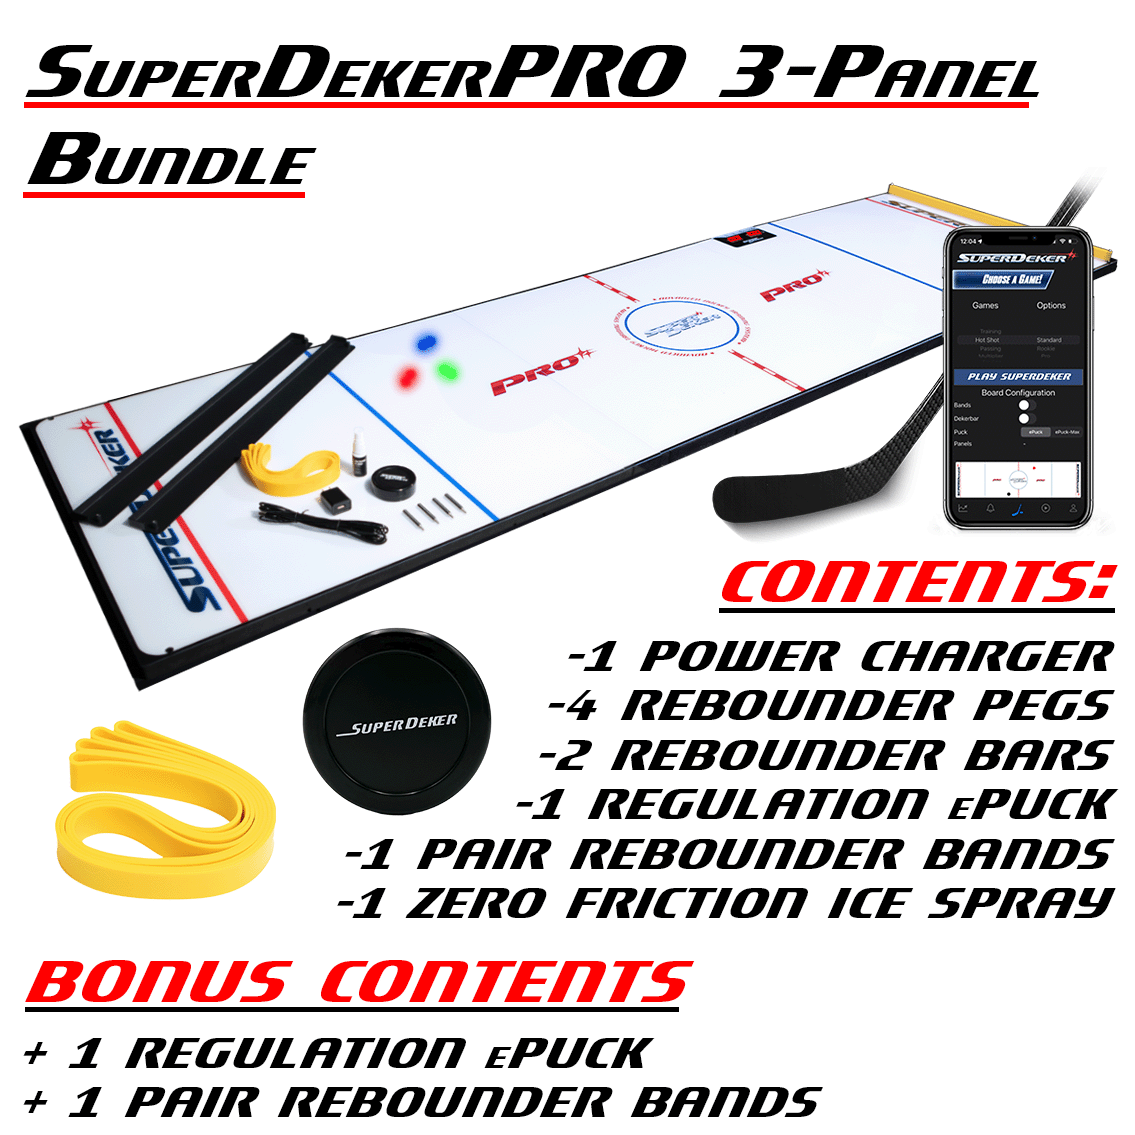 SuperDeker is the original Potent Hockey Trainer Synthetic Ice Surface with Lights and Sensors for Training Hockey Stickhandling skills. Use with your Puck-Up Ramp to learn quick hockey puck recovery skills.